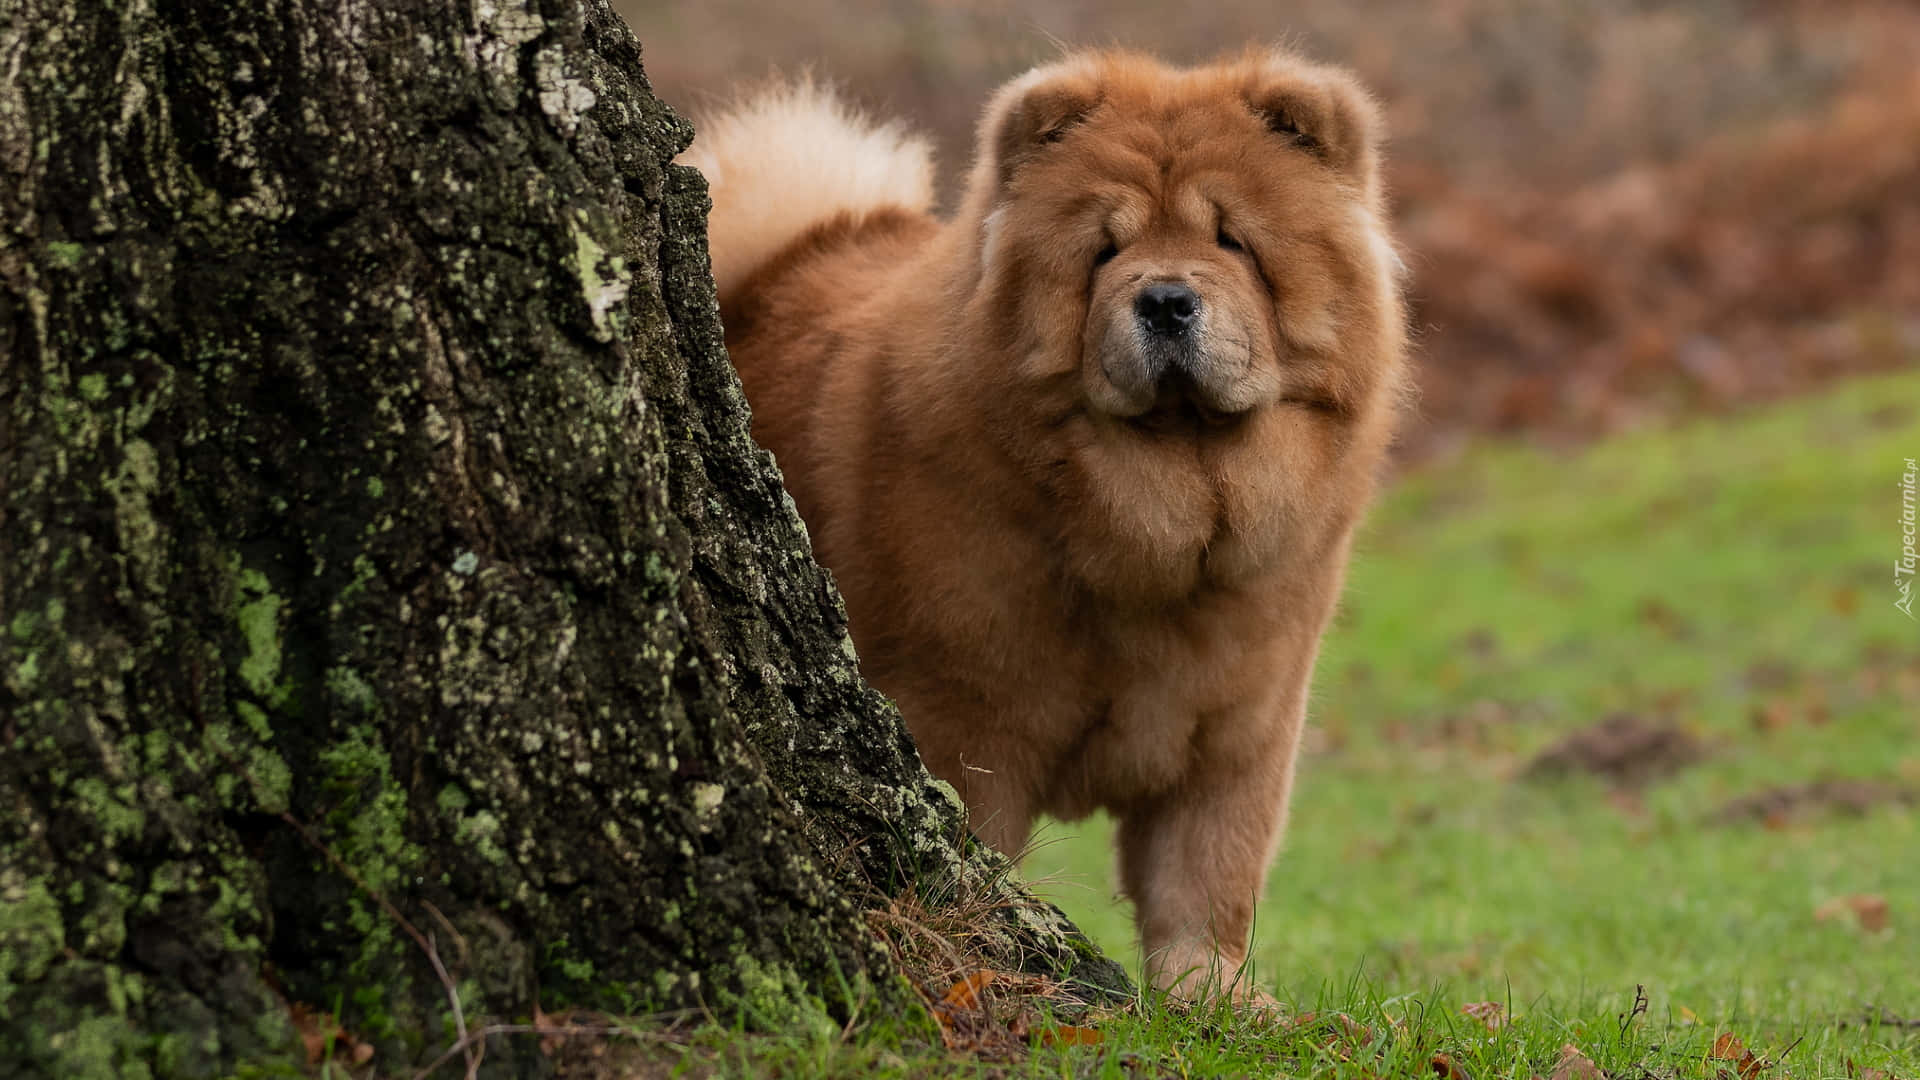 "This adorable Chow Chow is ready to keep you company!"